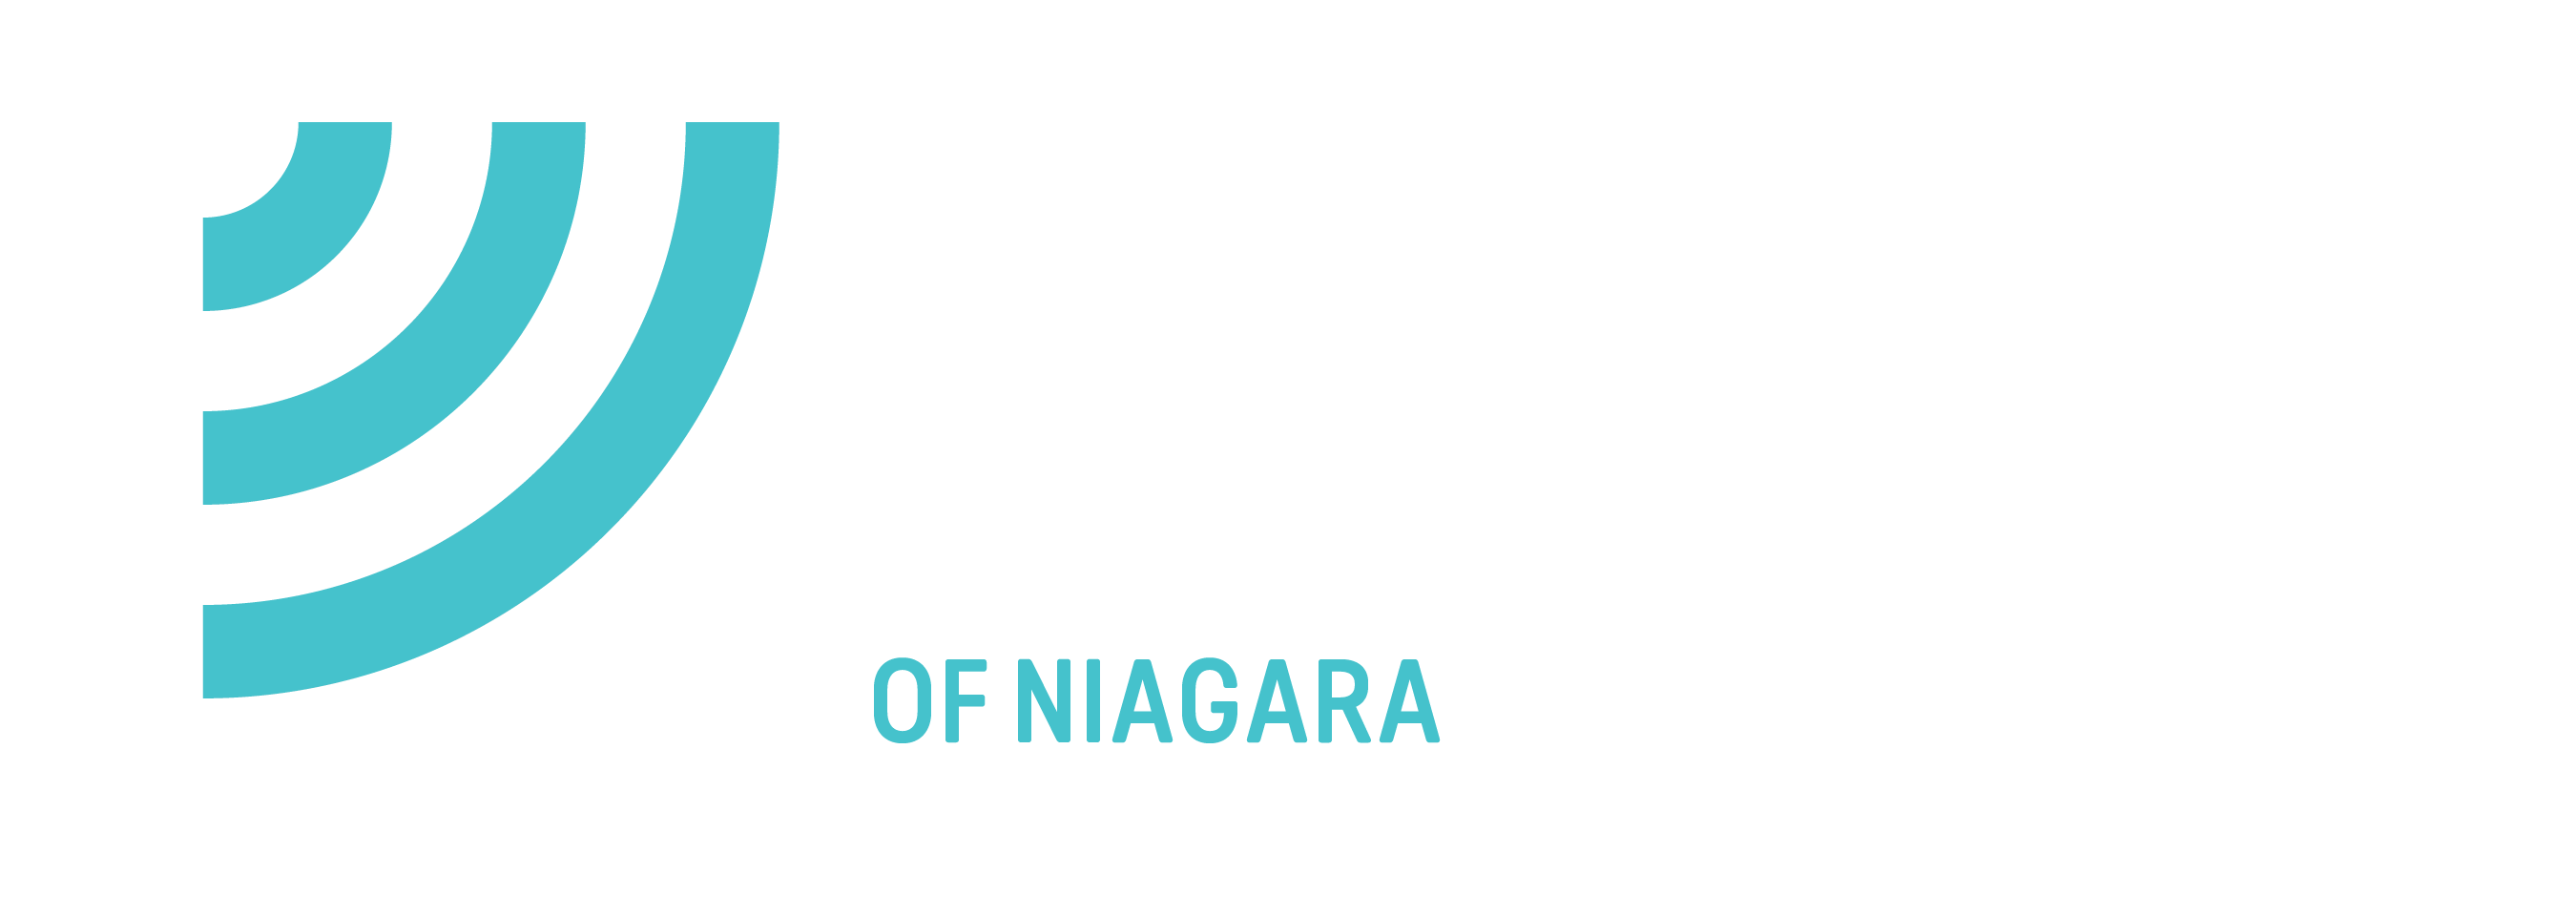 OVER HALF A CENTURY OF MAKING A DIFFERENCE - Big Brothers Big Sisters of Niagara